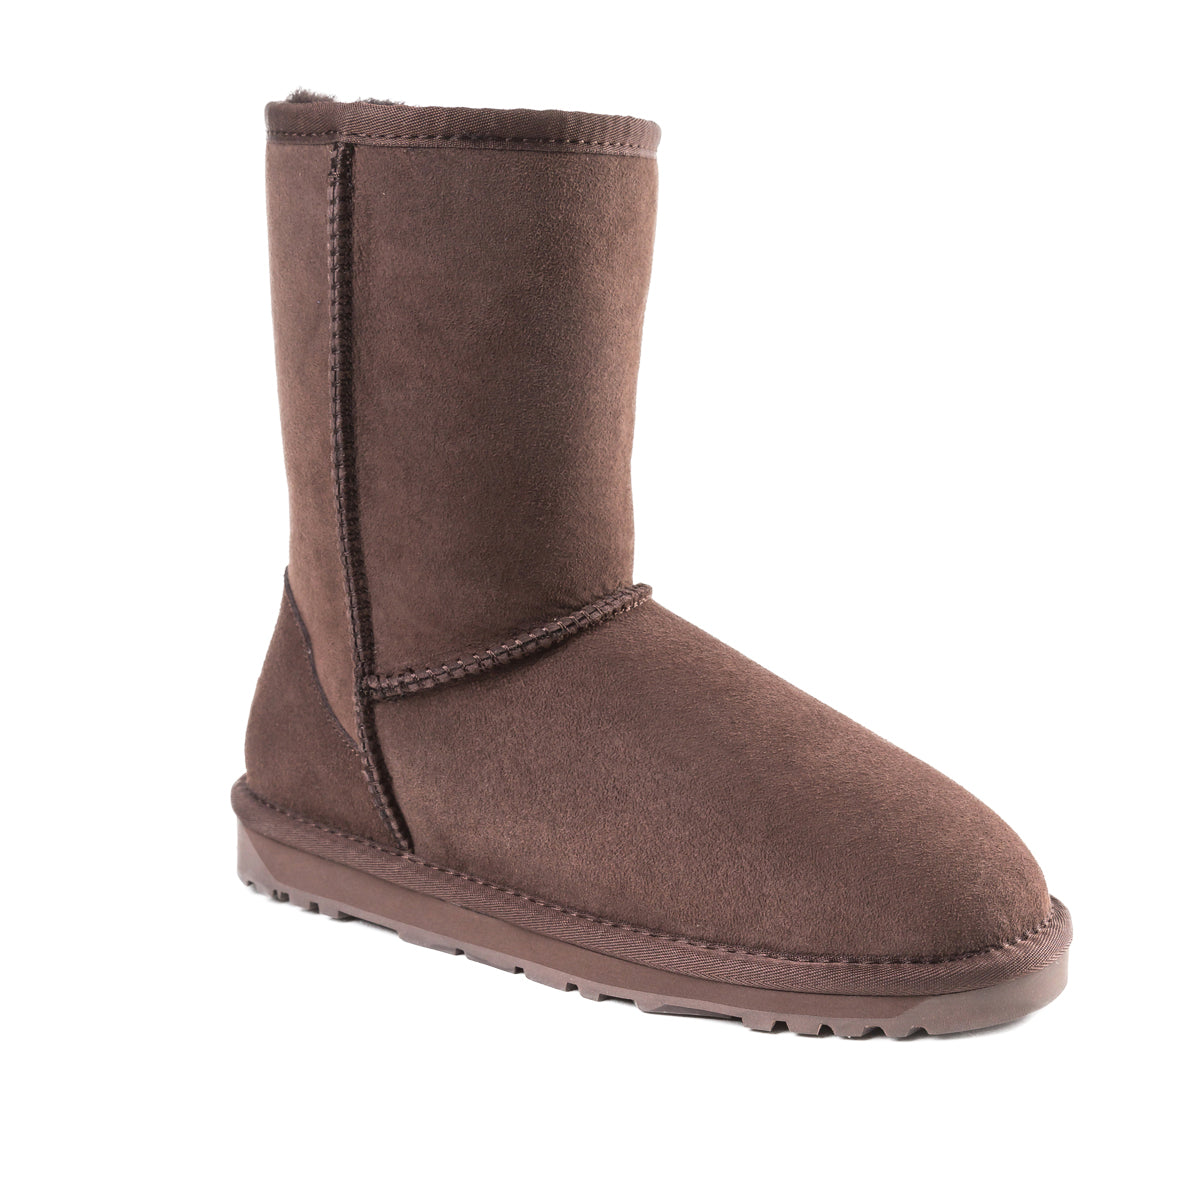 Buy Cheap UGG LV shoes for UGG Short Boots #9999926321 from